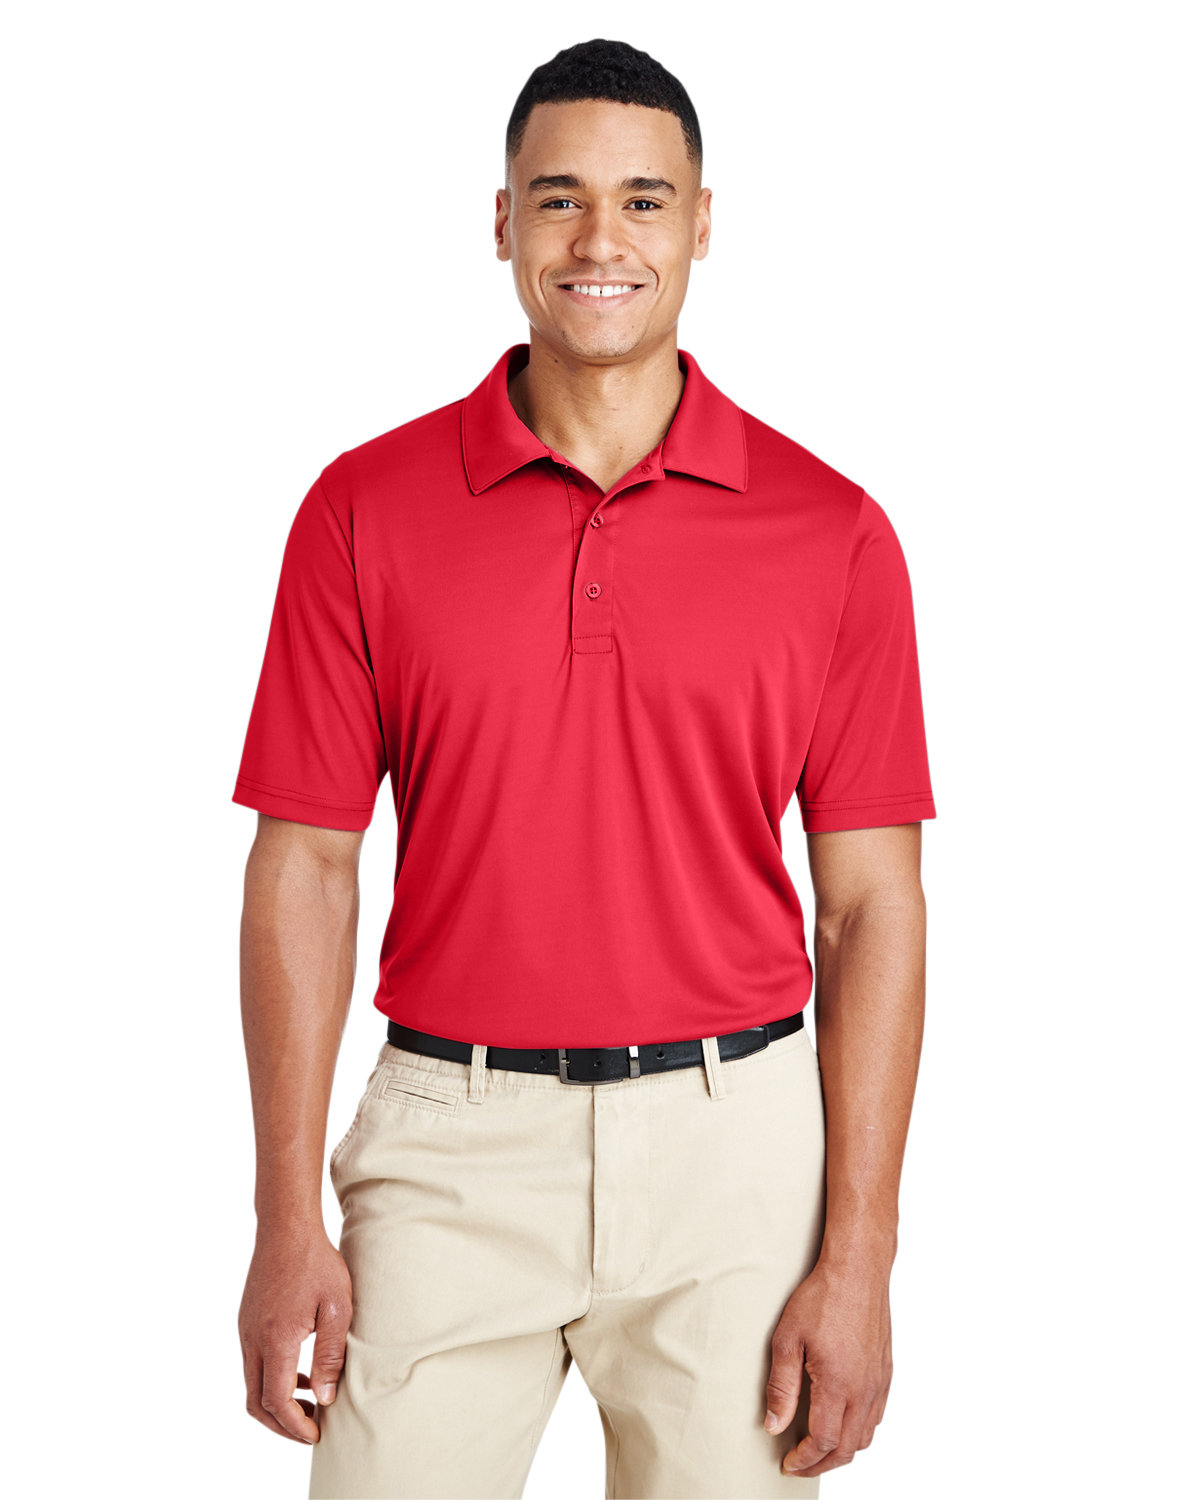 Team 365 Men's Zone Performance Polo SPORT RED 